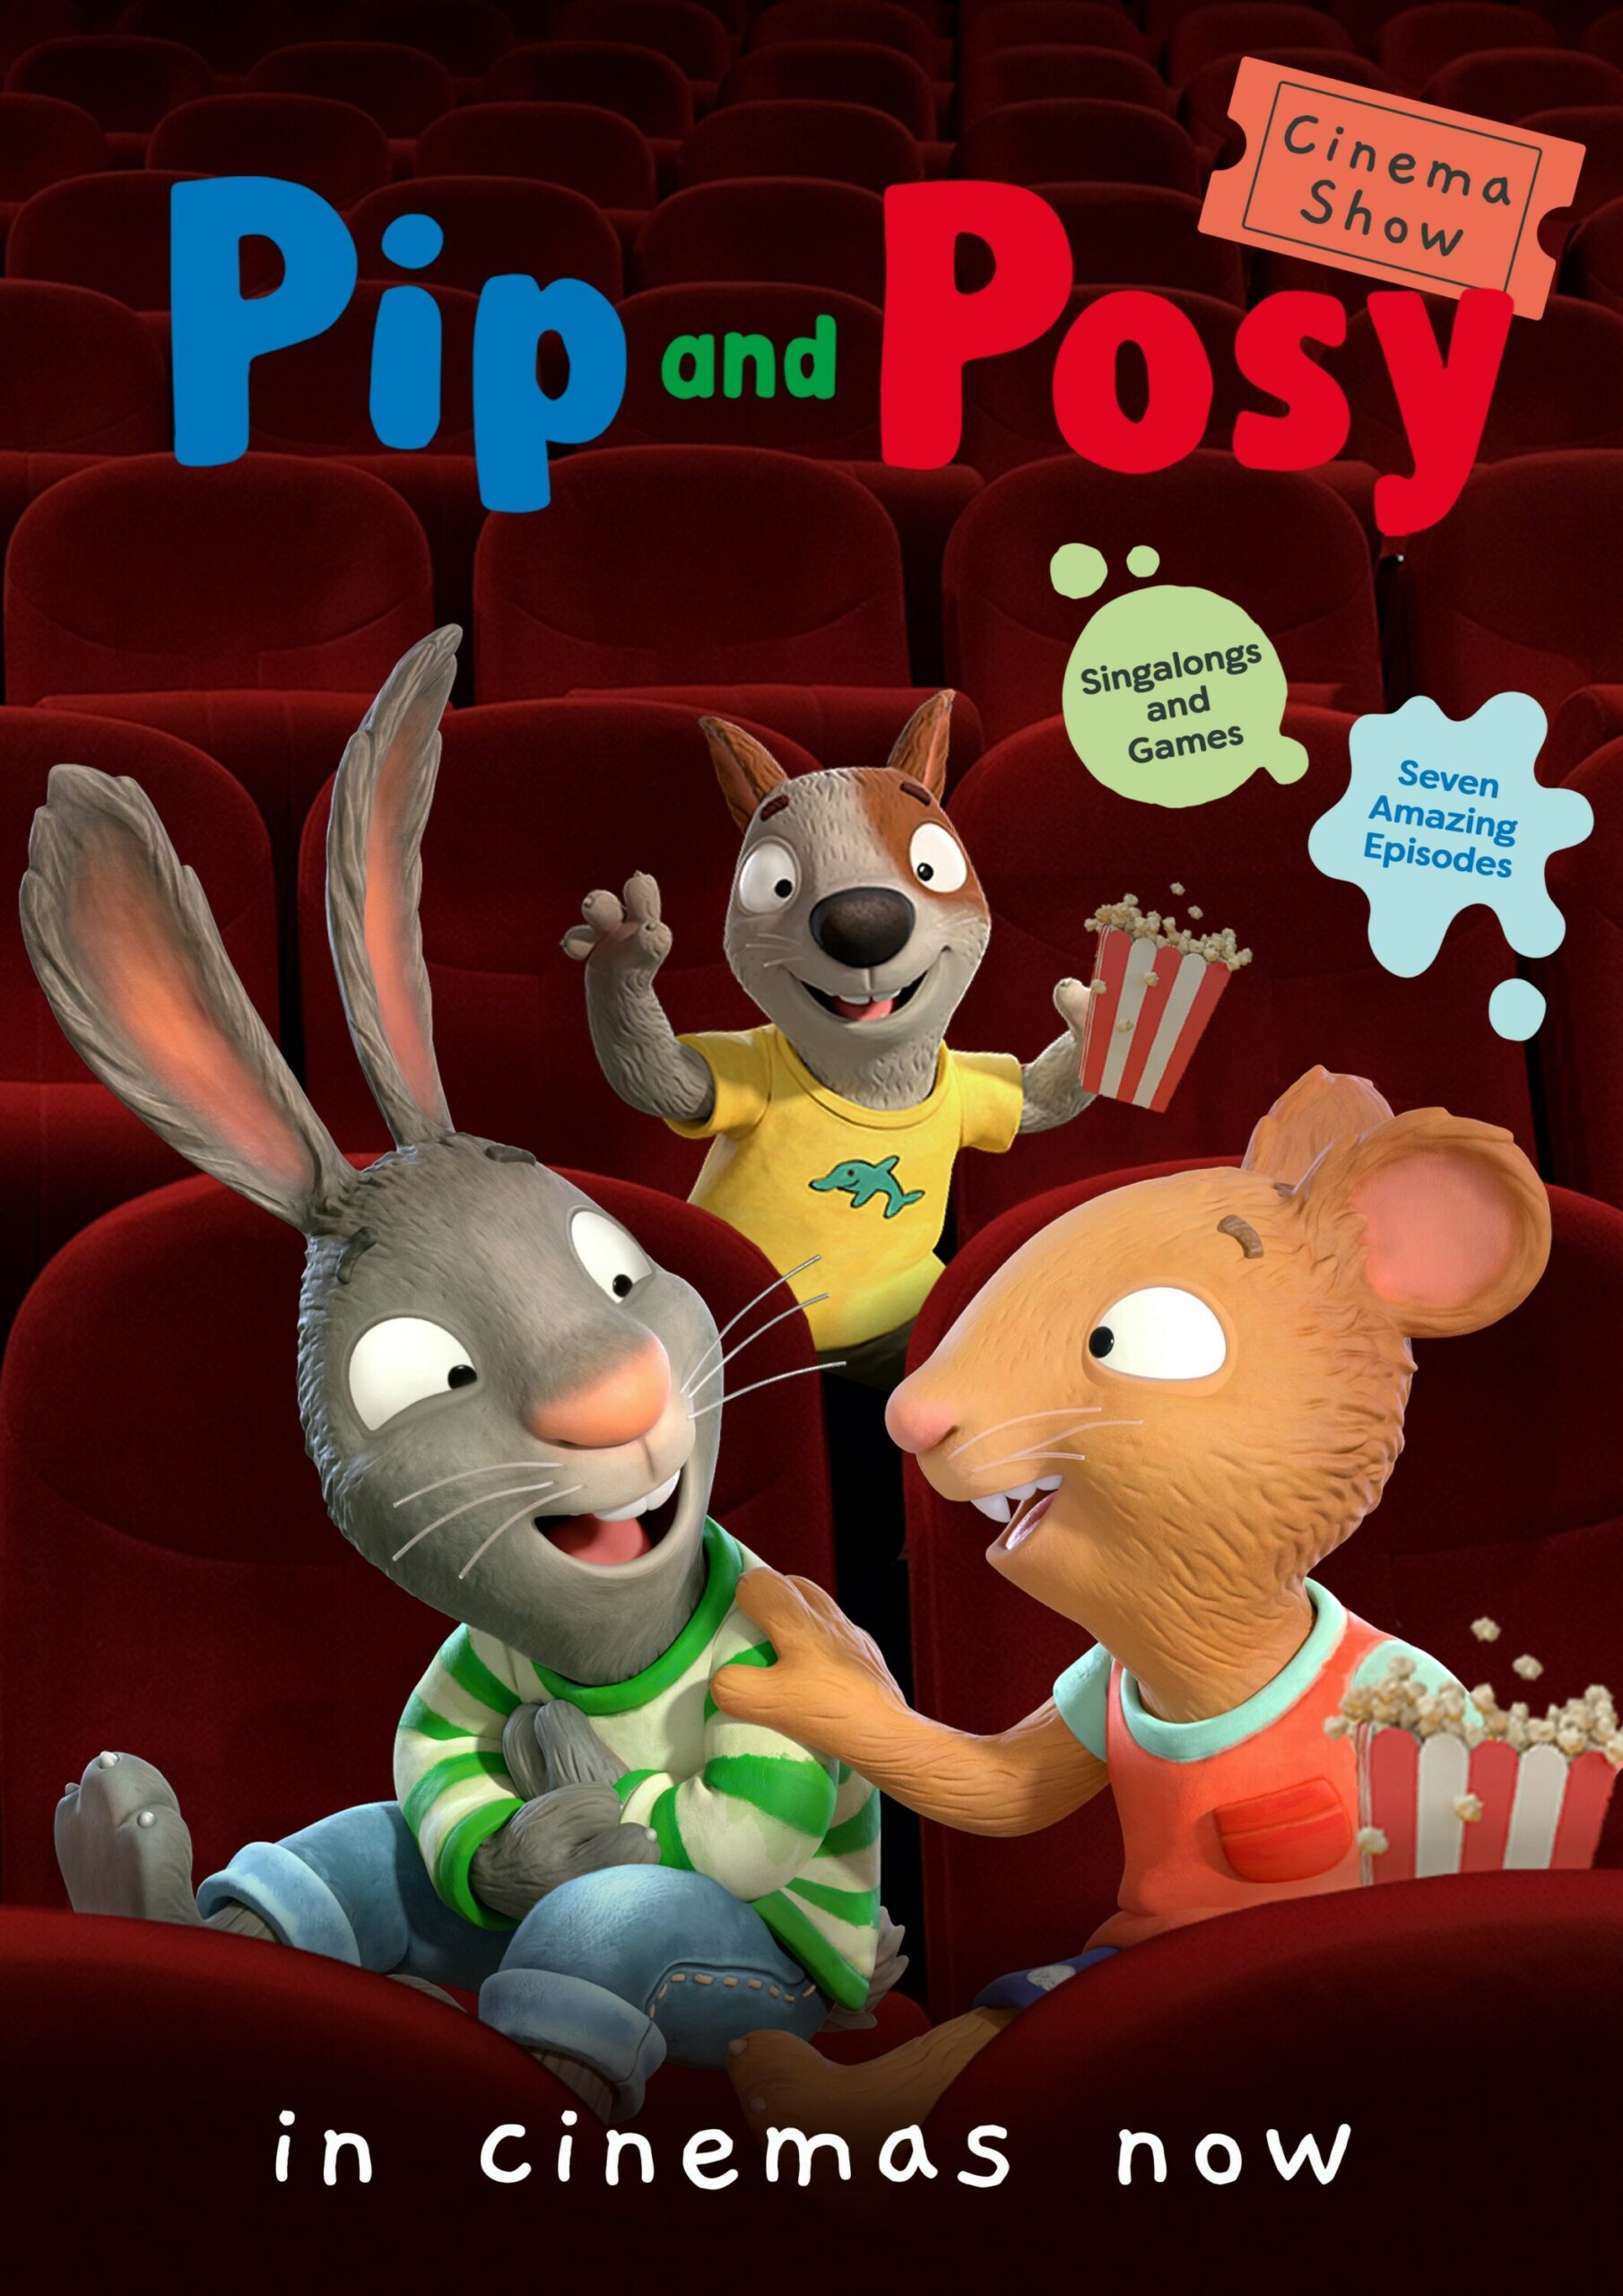 Magic Light Pictures debuts Pip and Posy show on the big screen -Toy World  Magazine | The business magazine with a passion for toys